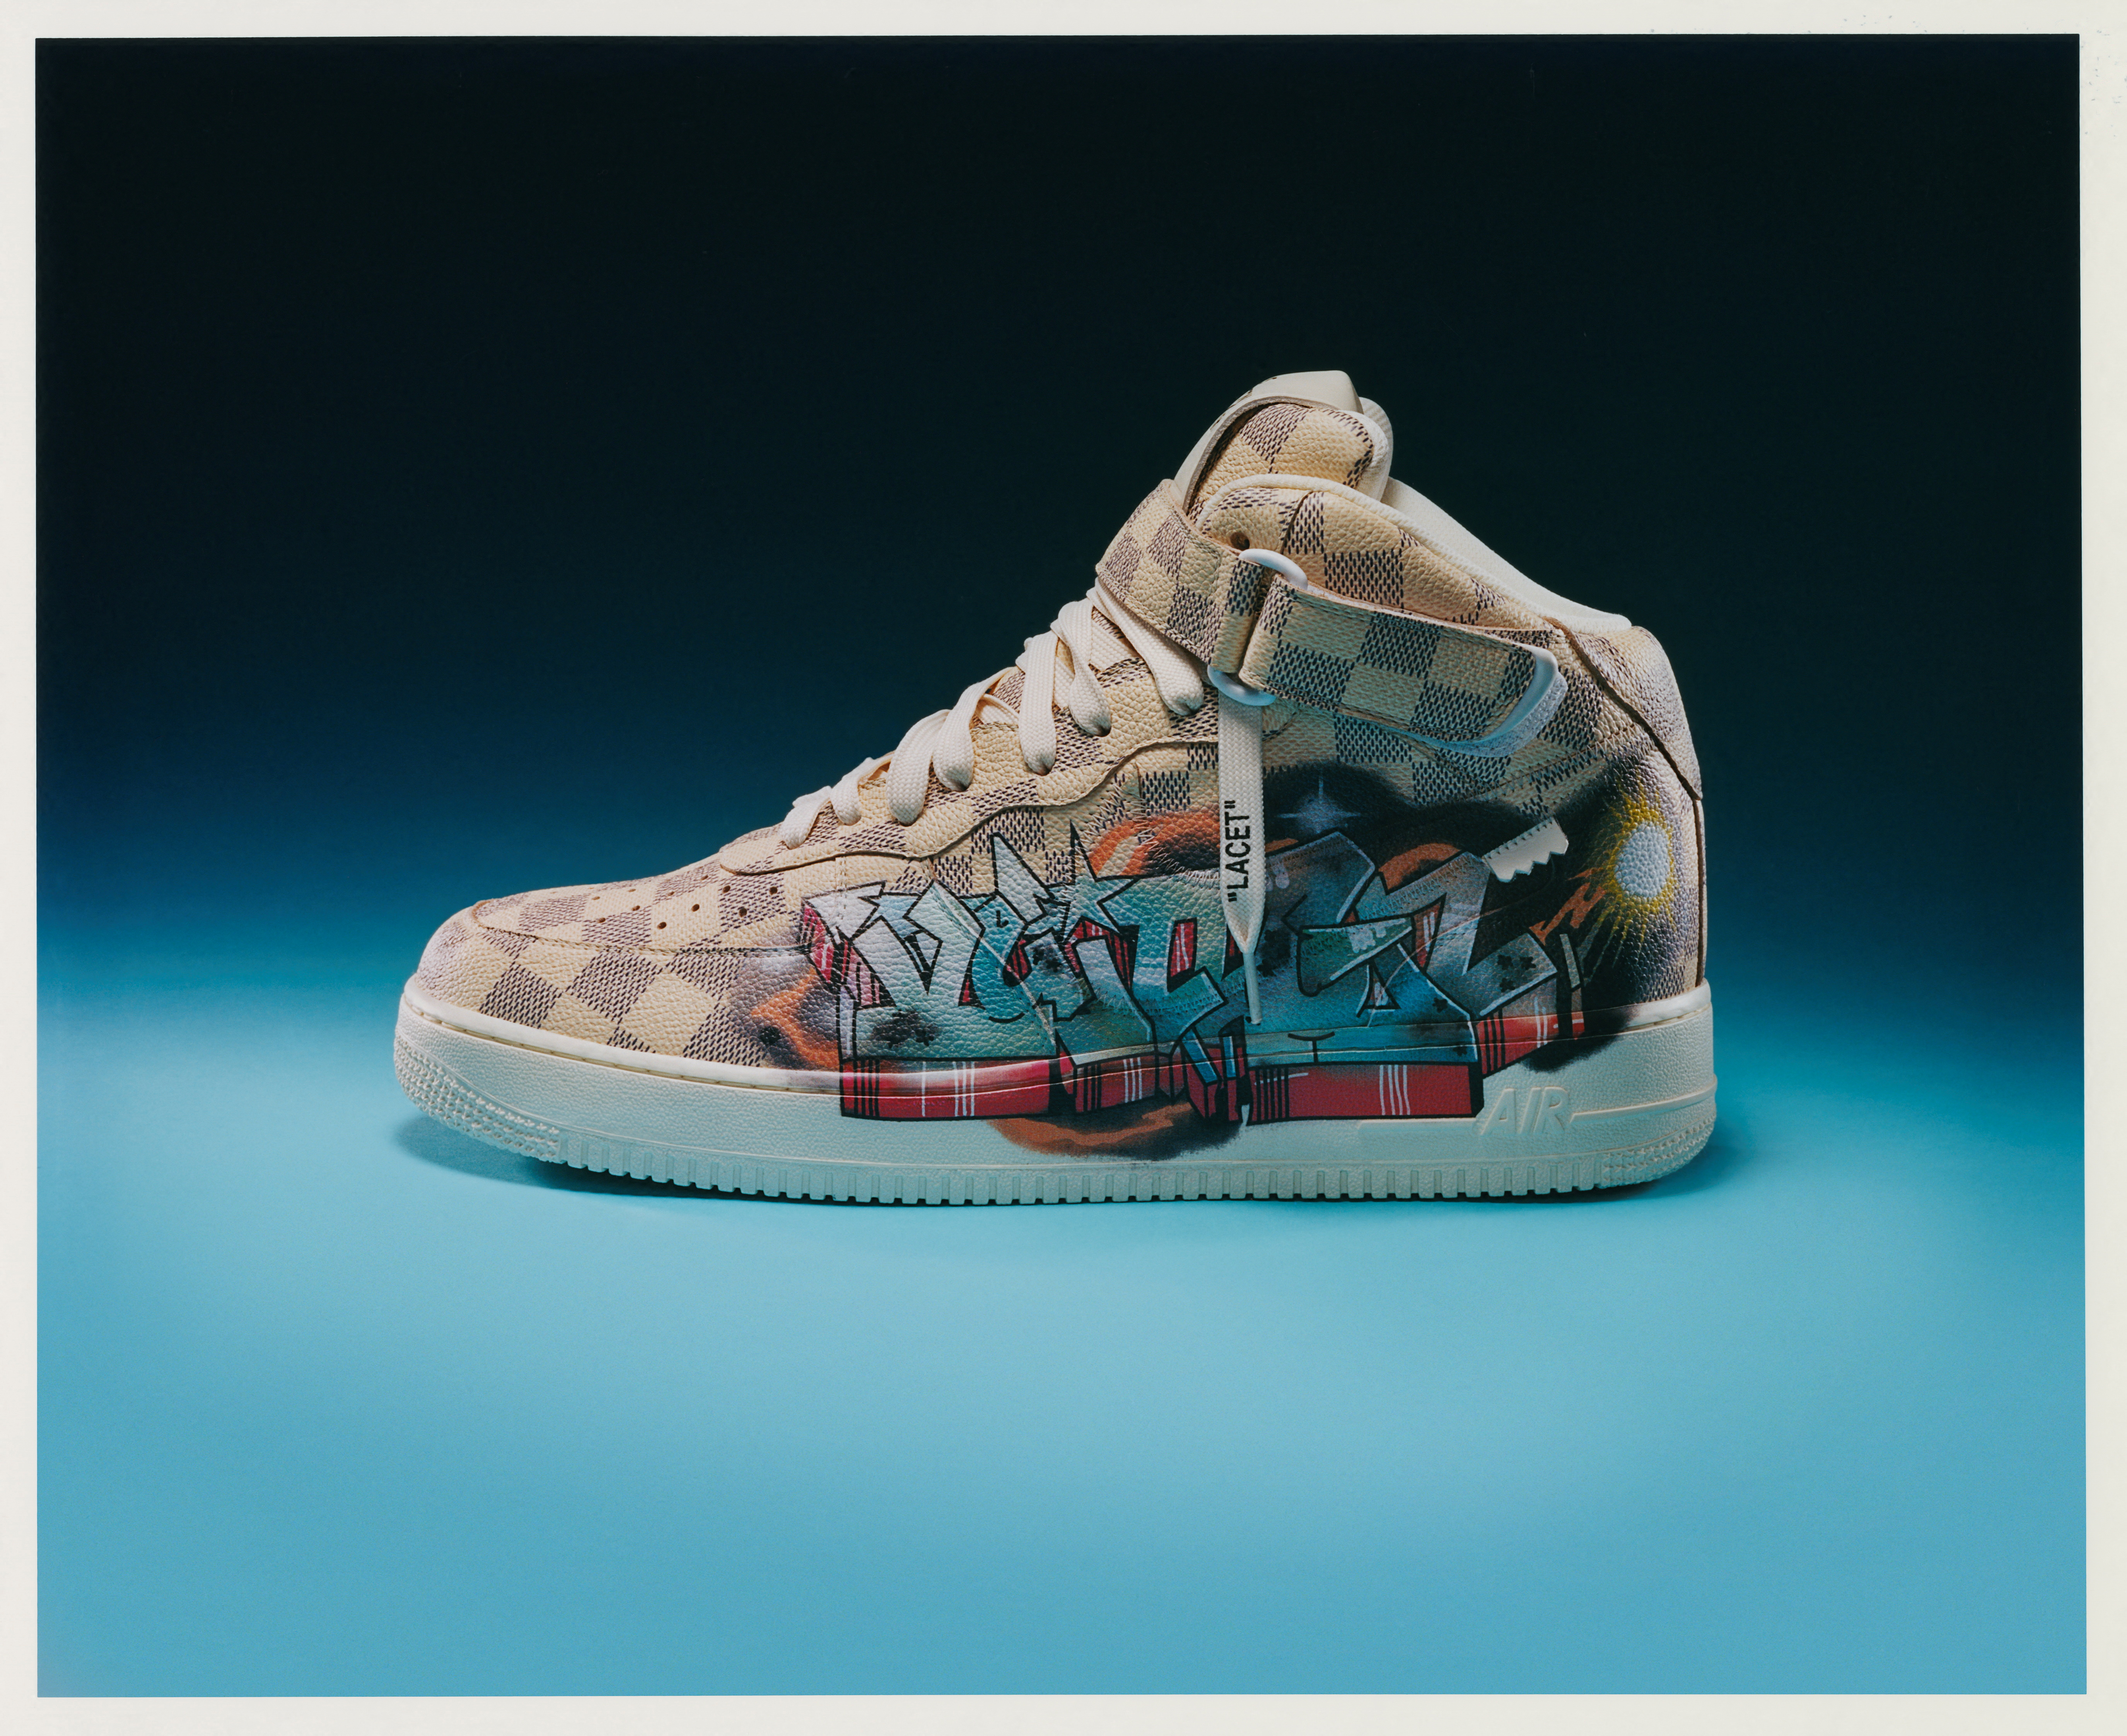 Louis Vuitton and Nike 'Air Force 1' by Virgil Abloh Exhibition